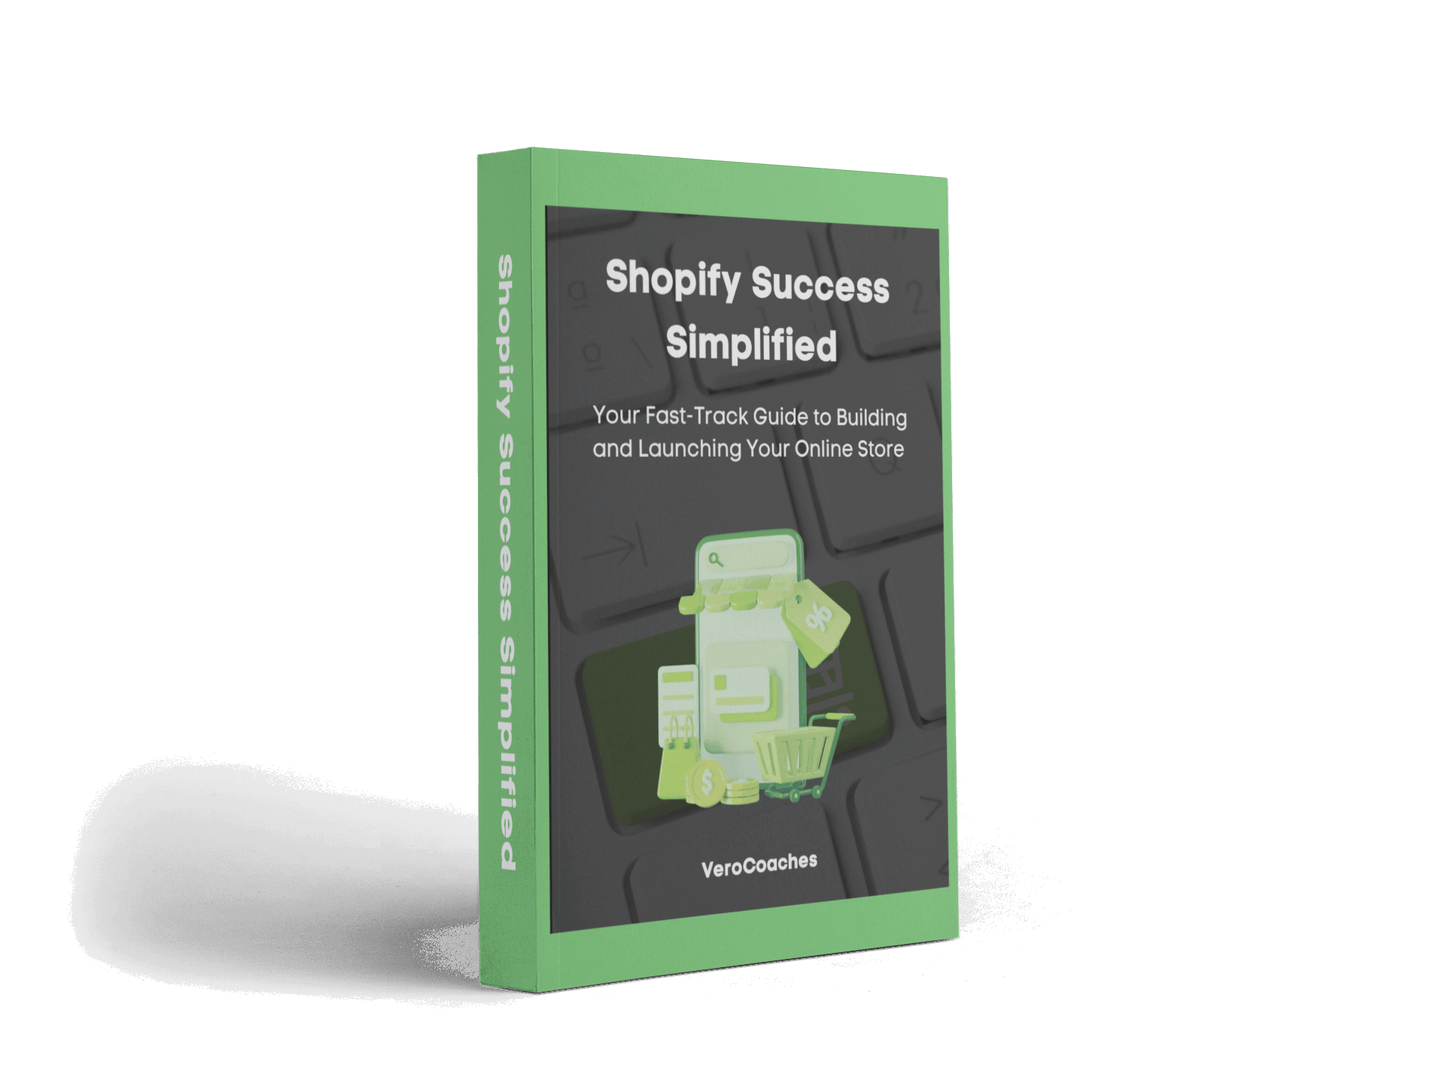 Cover of Shopify Success Simplified Guide showing step-by-step e-commerce launch process